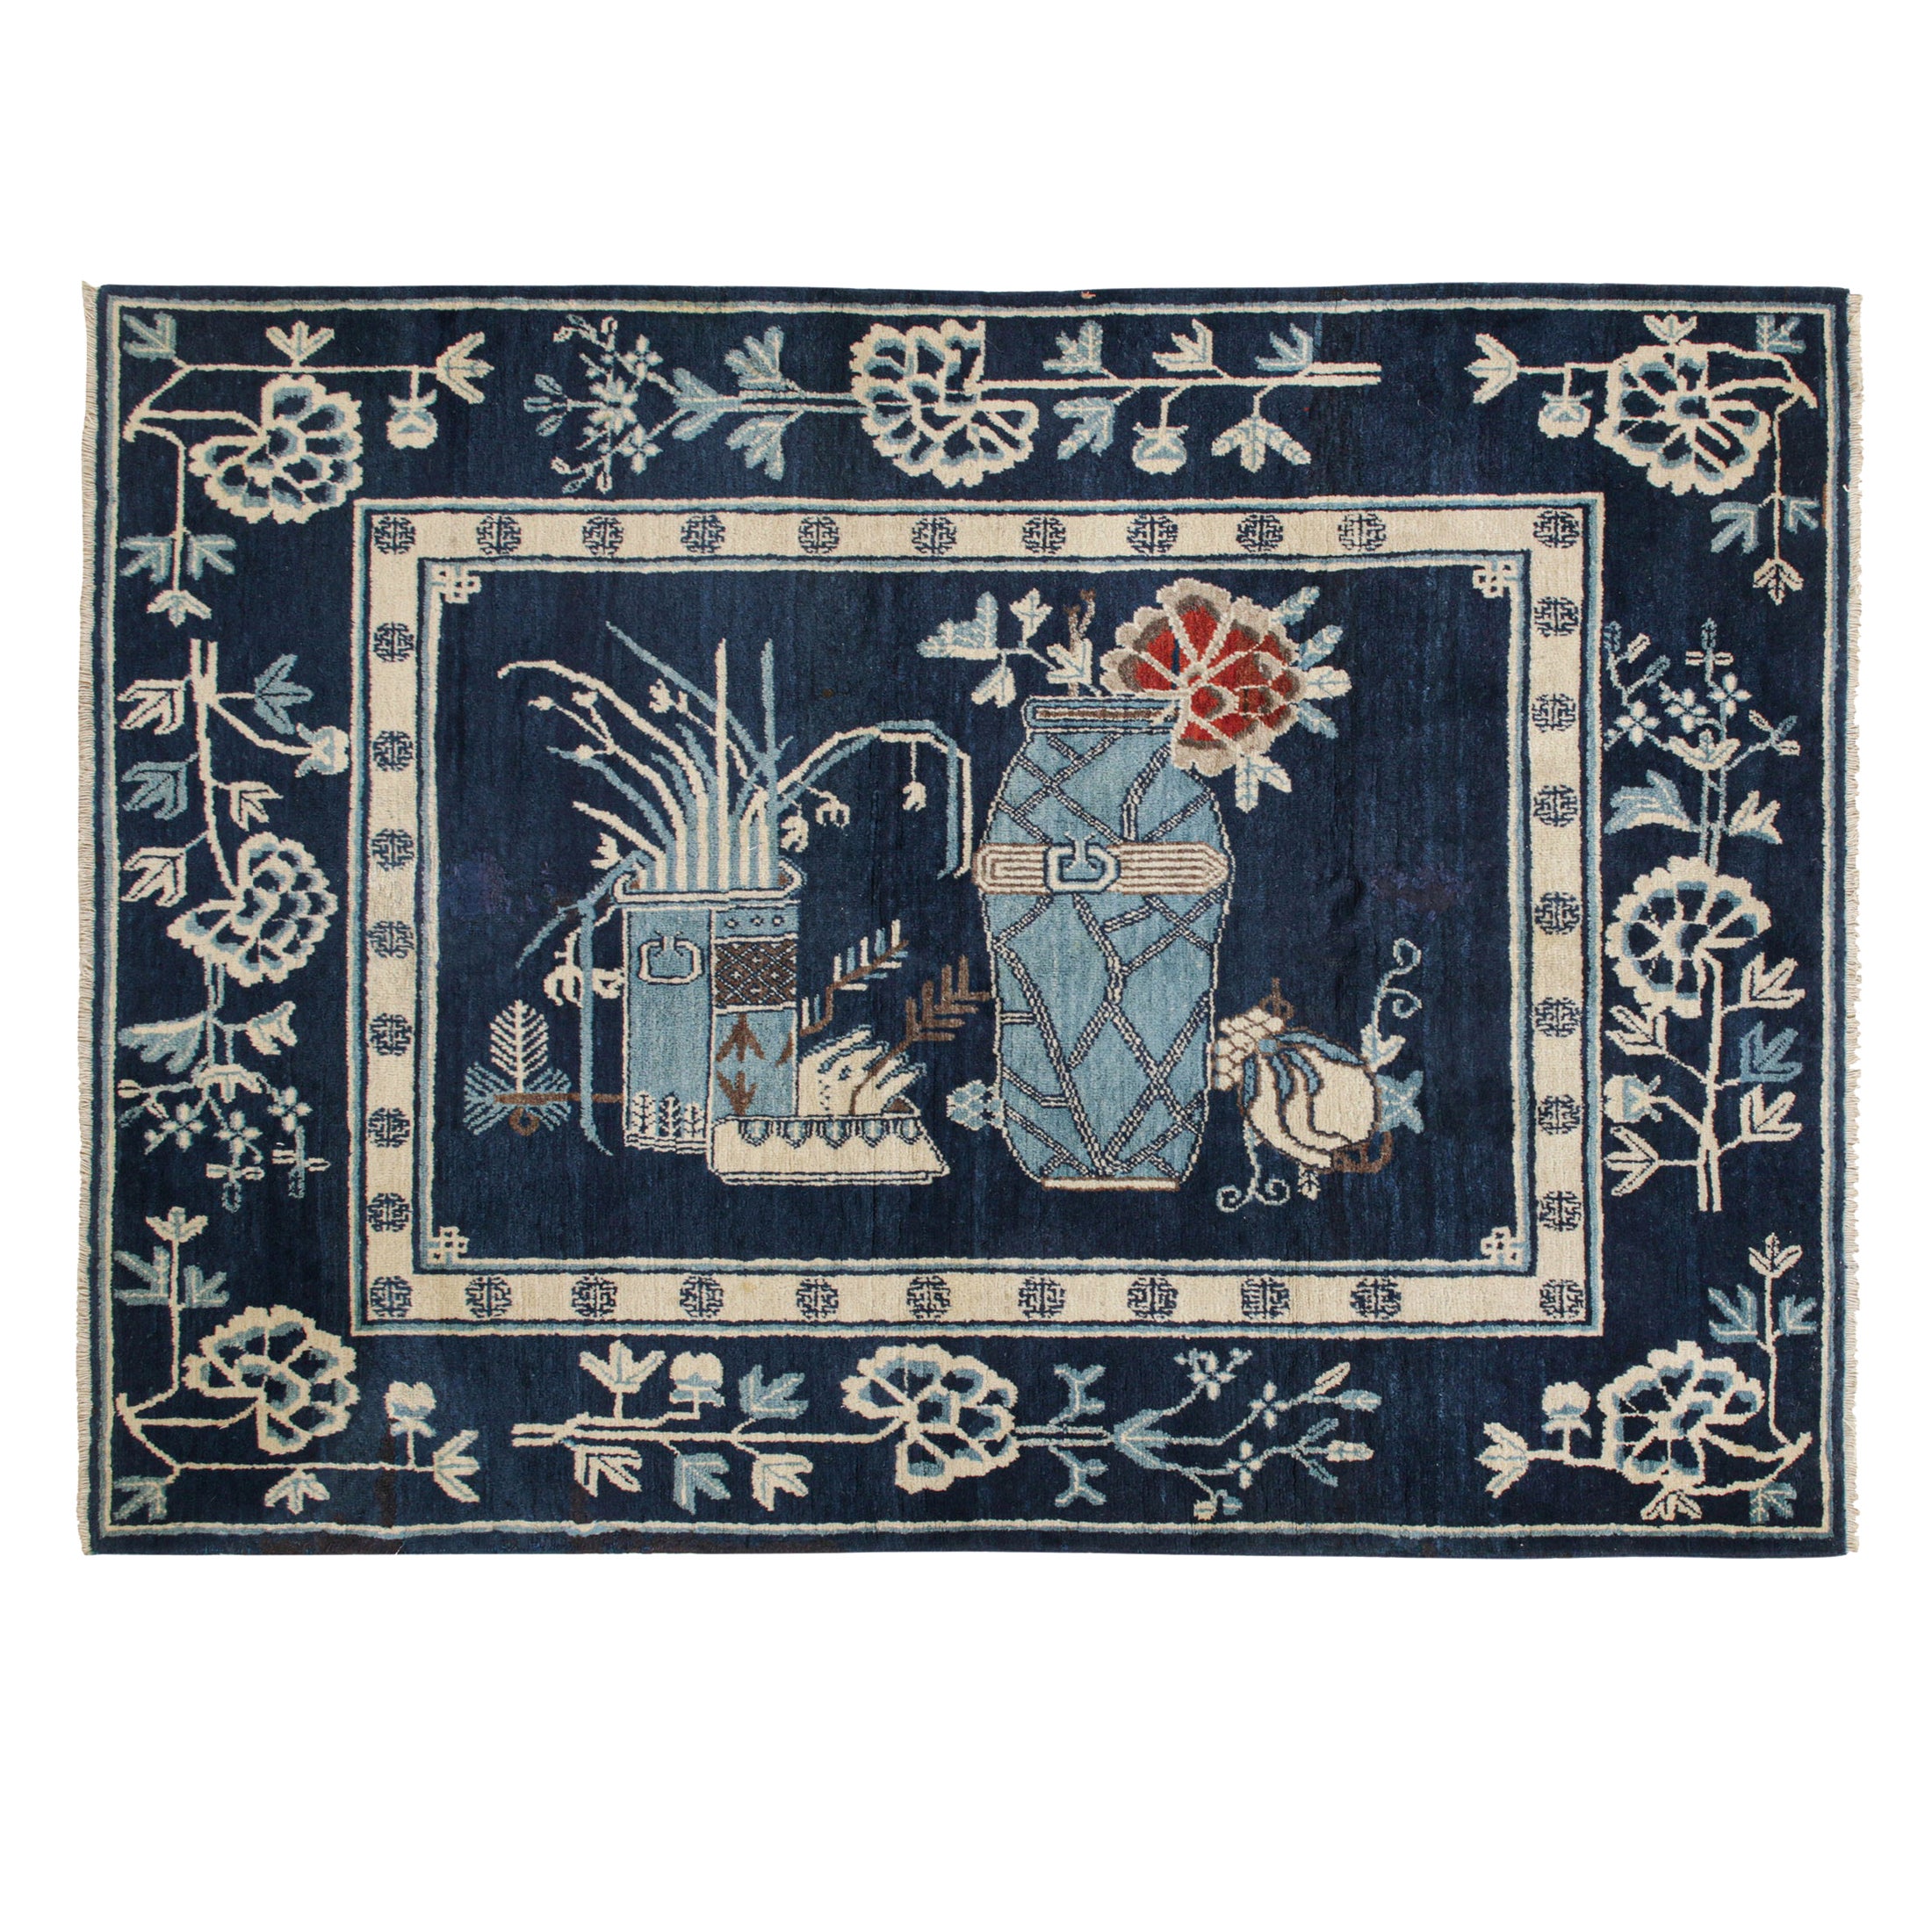 Antique Chinese Art Deco Rug in Navy Blue with Pictorial, from Rug & Kilim